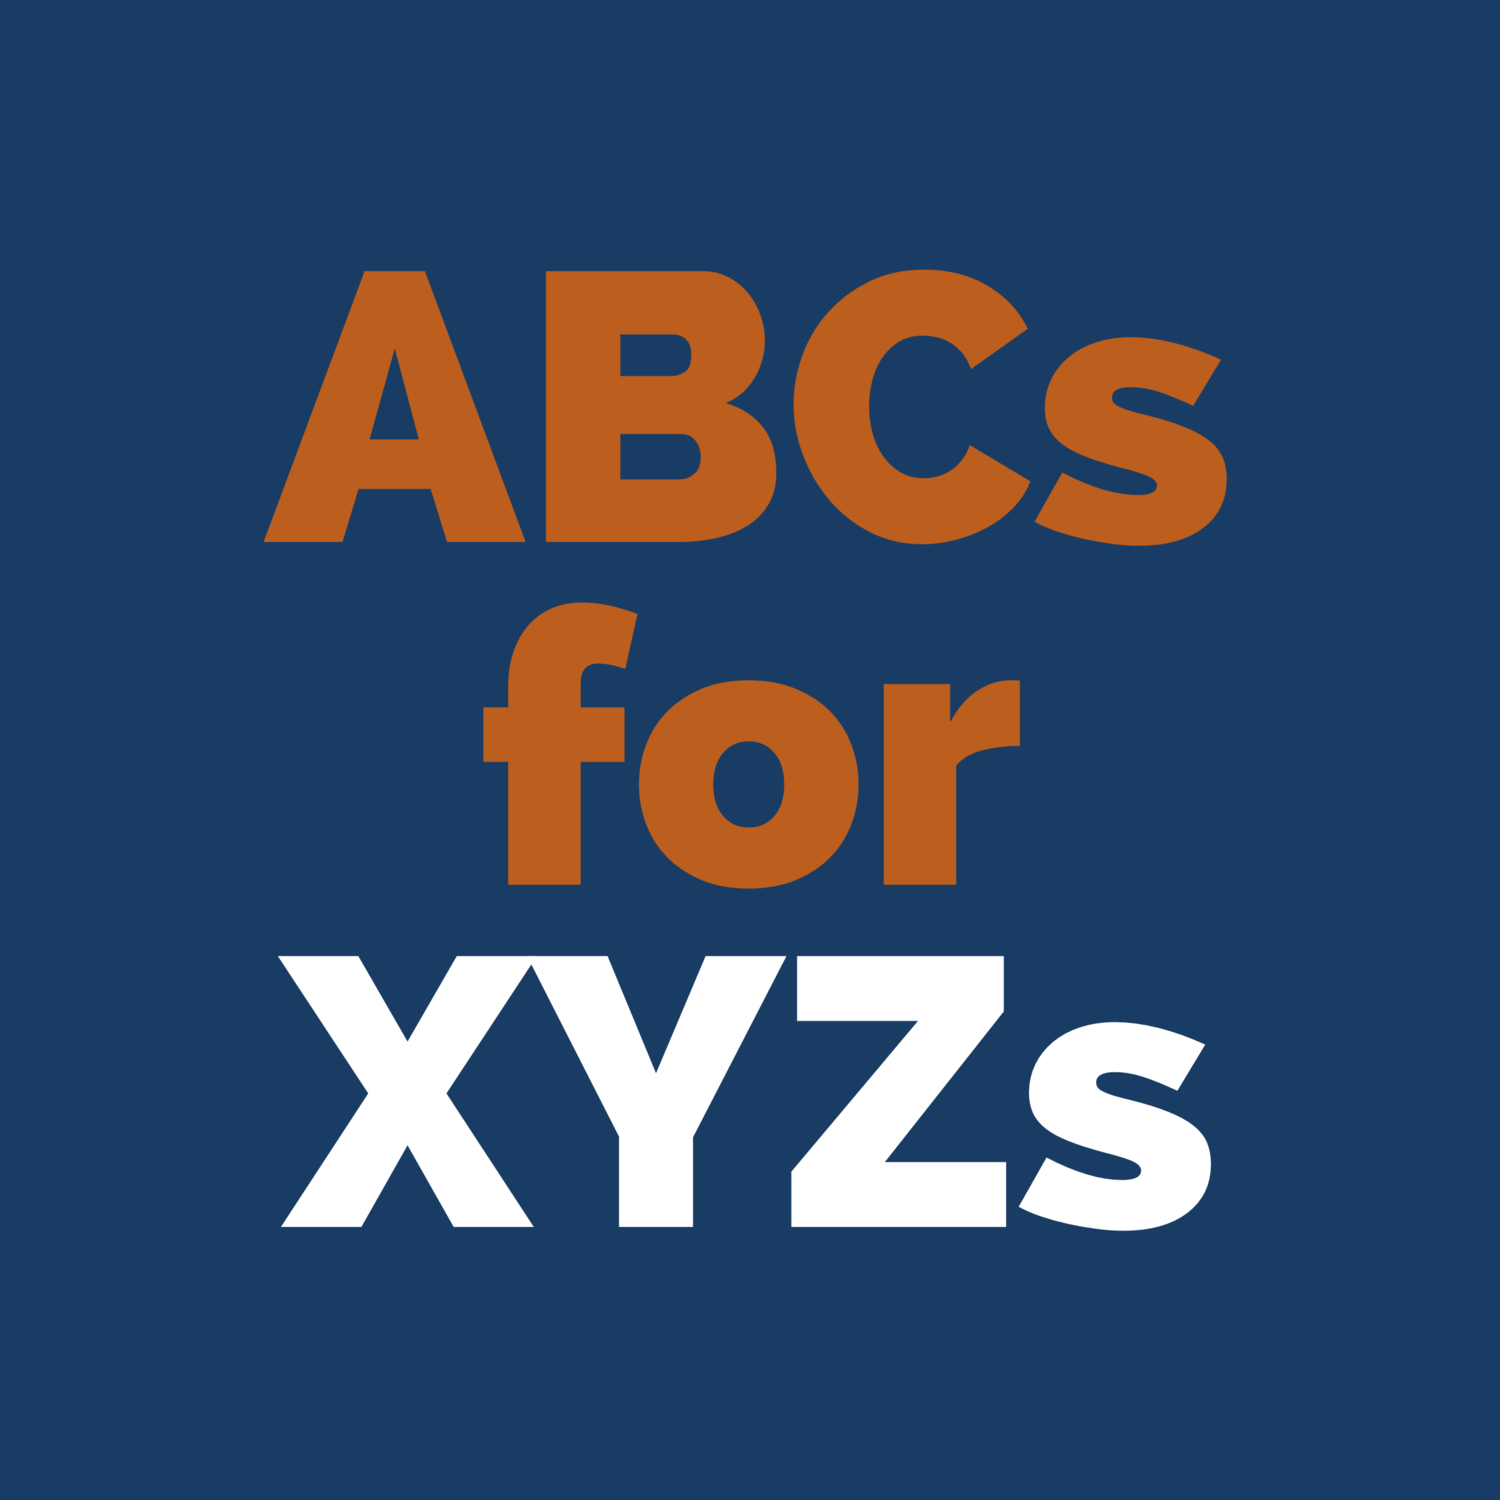 ABCs for XYZs